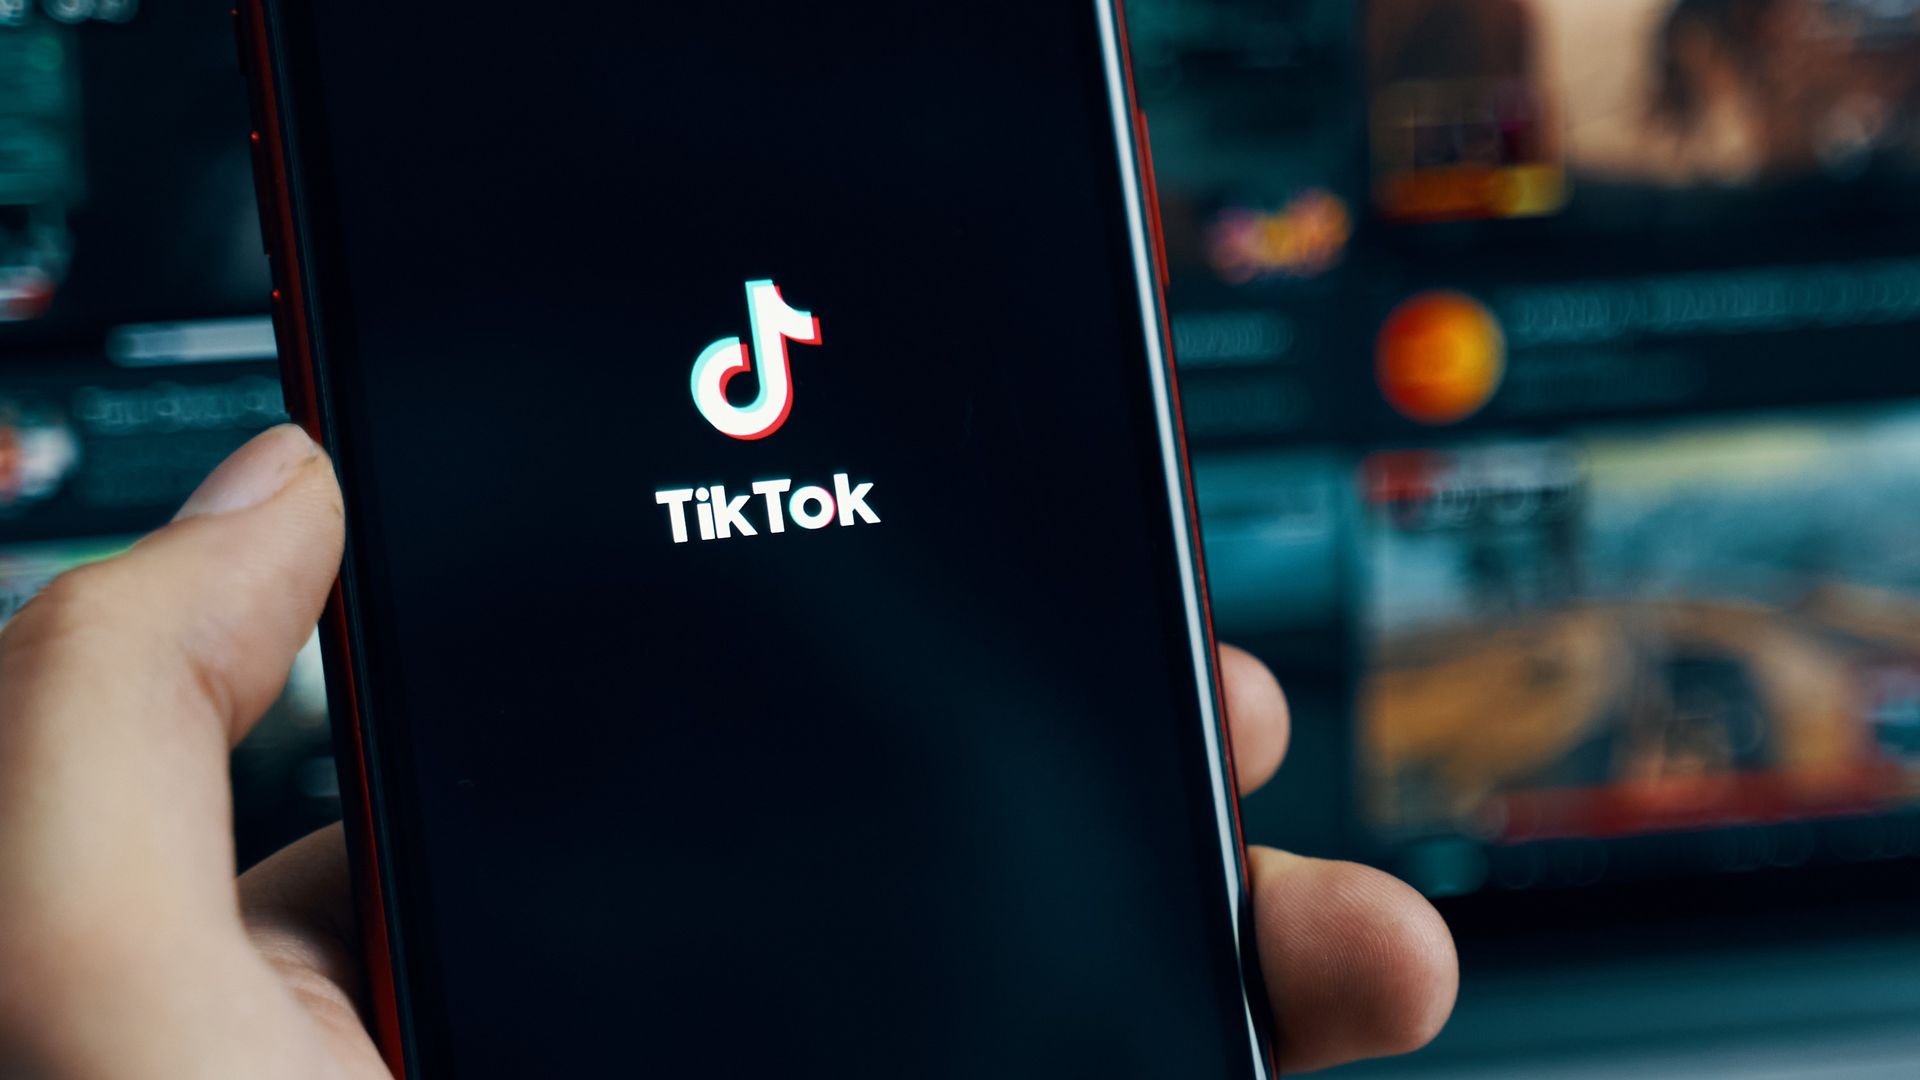 Today, we are going to be going over how to view watch history on TikTok, so you can learn what you have been watching on the popular social media app.